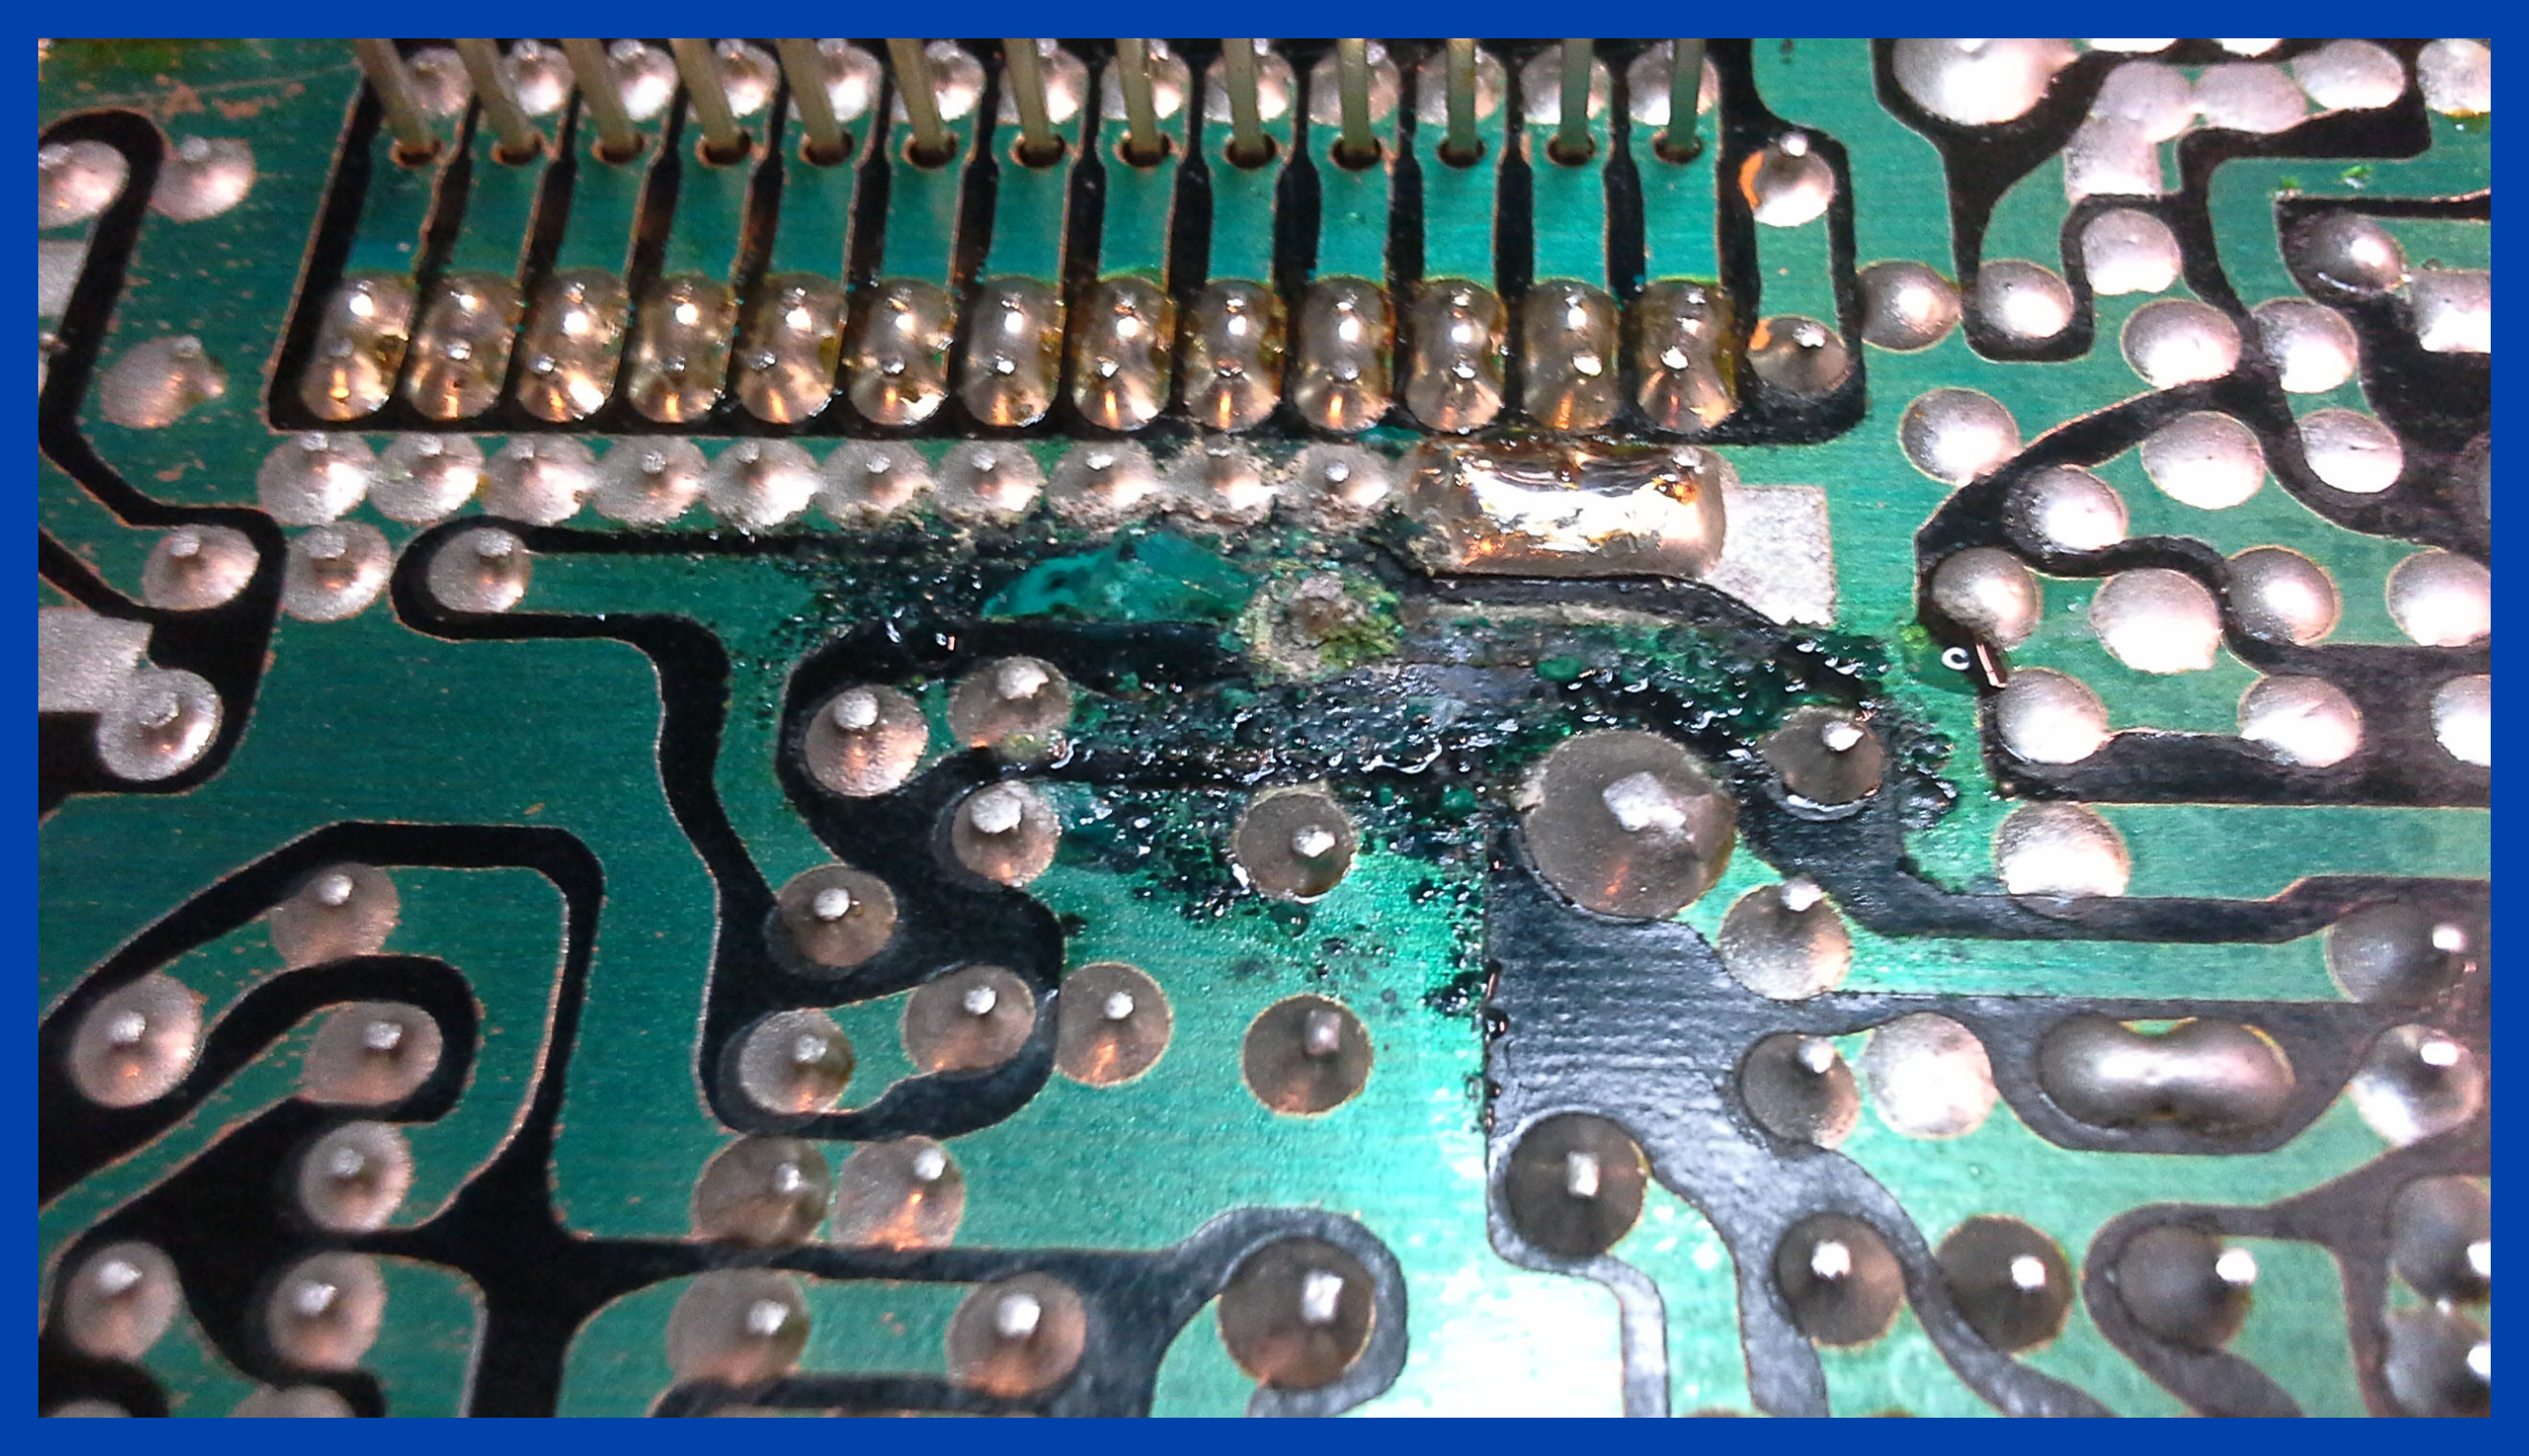 Damage caused by leaking Capacitors